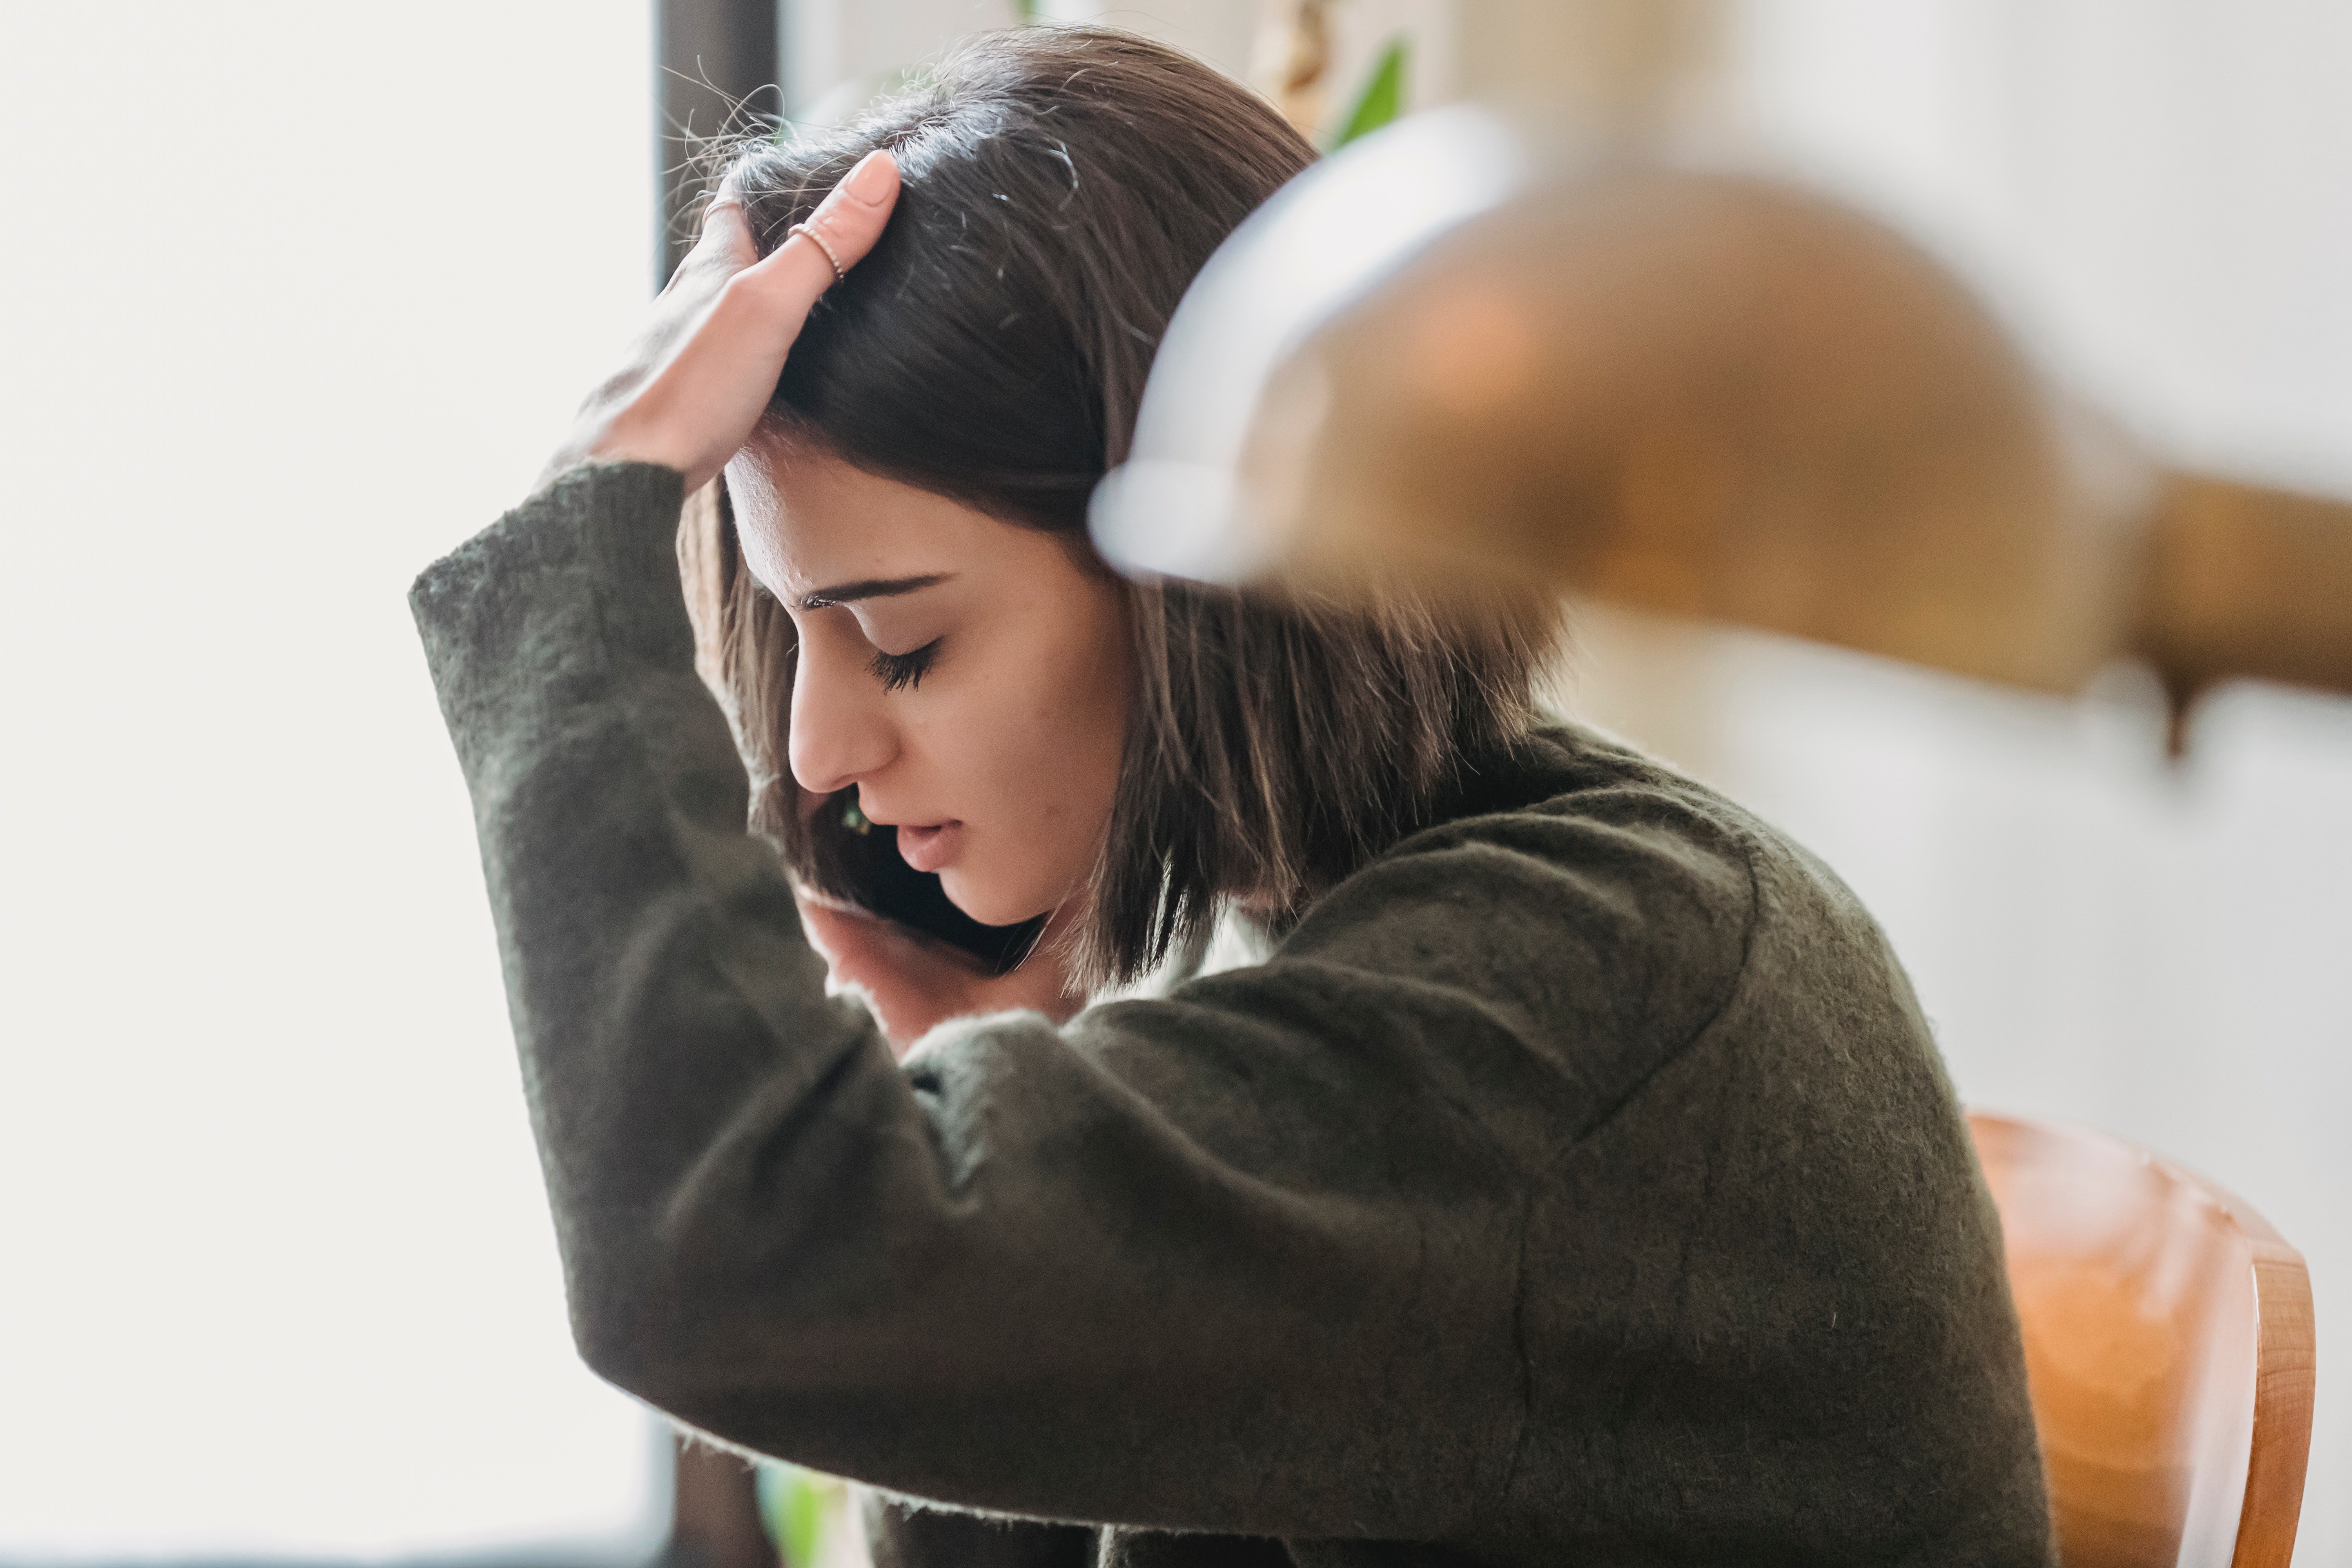 Linda was stunned when she received a call from Alex's contact | Photo: Pexels